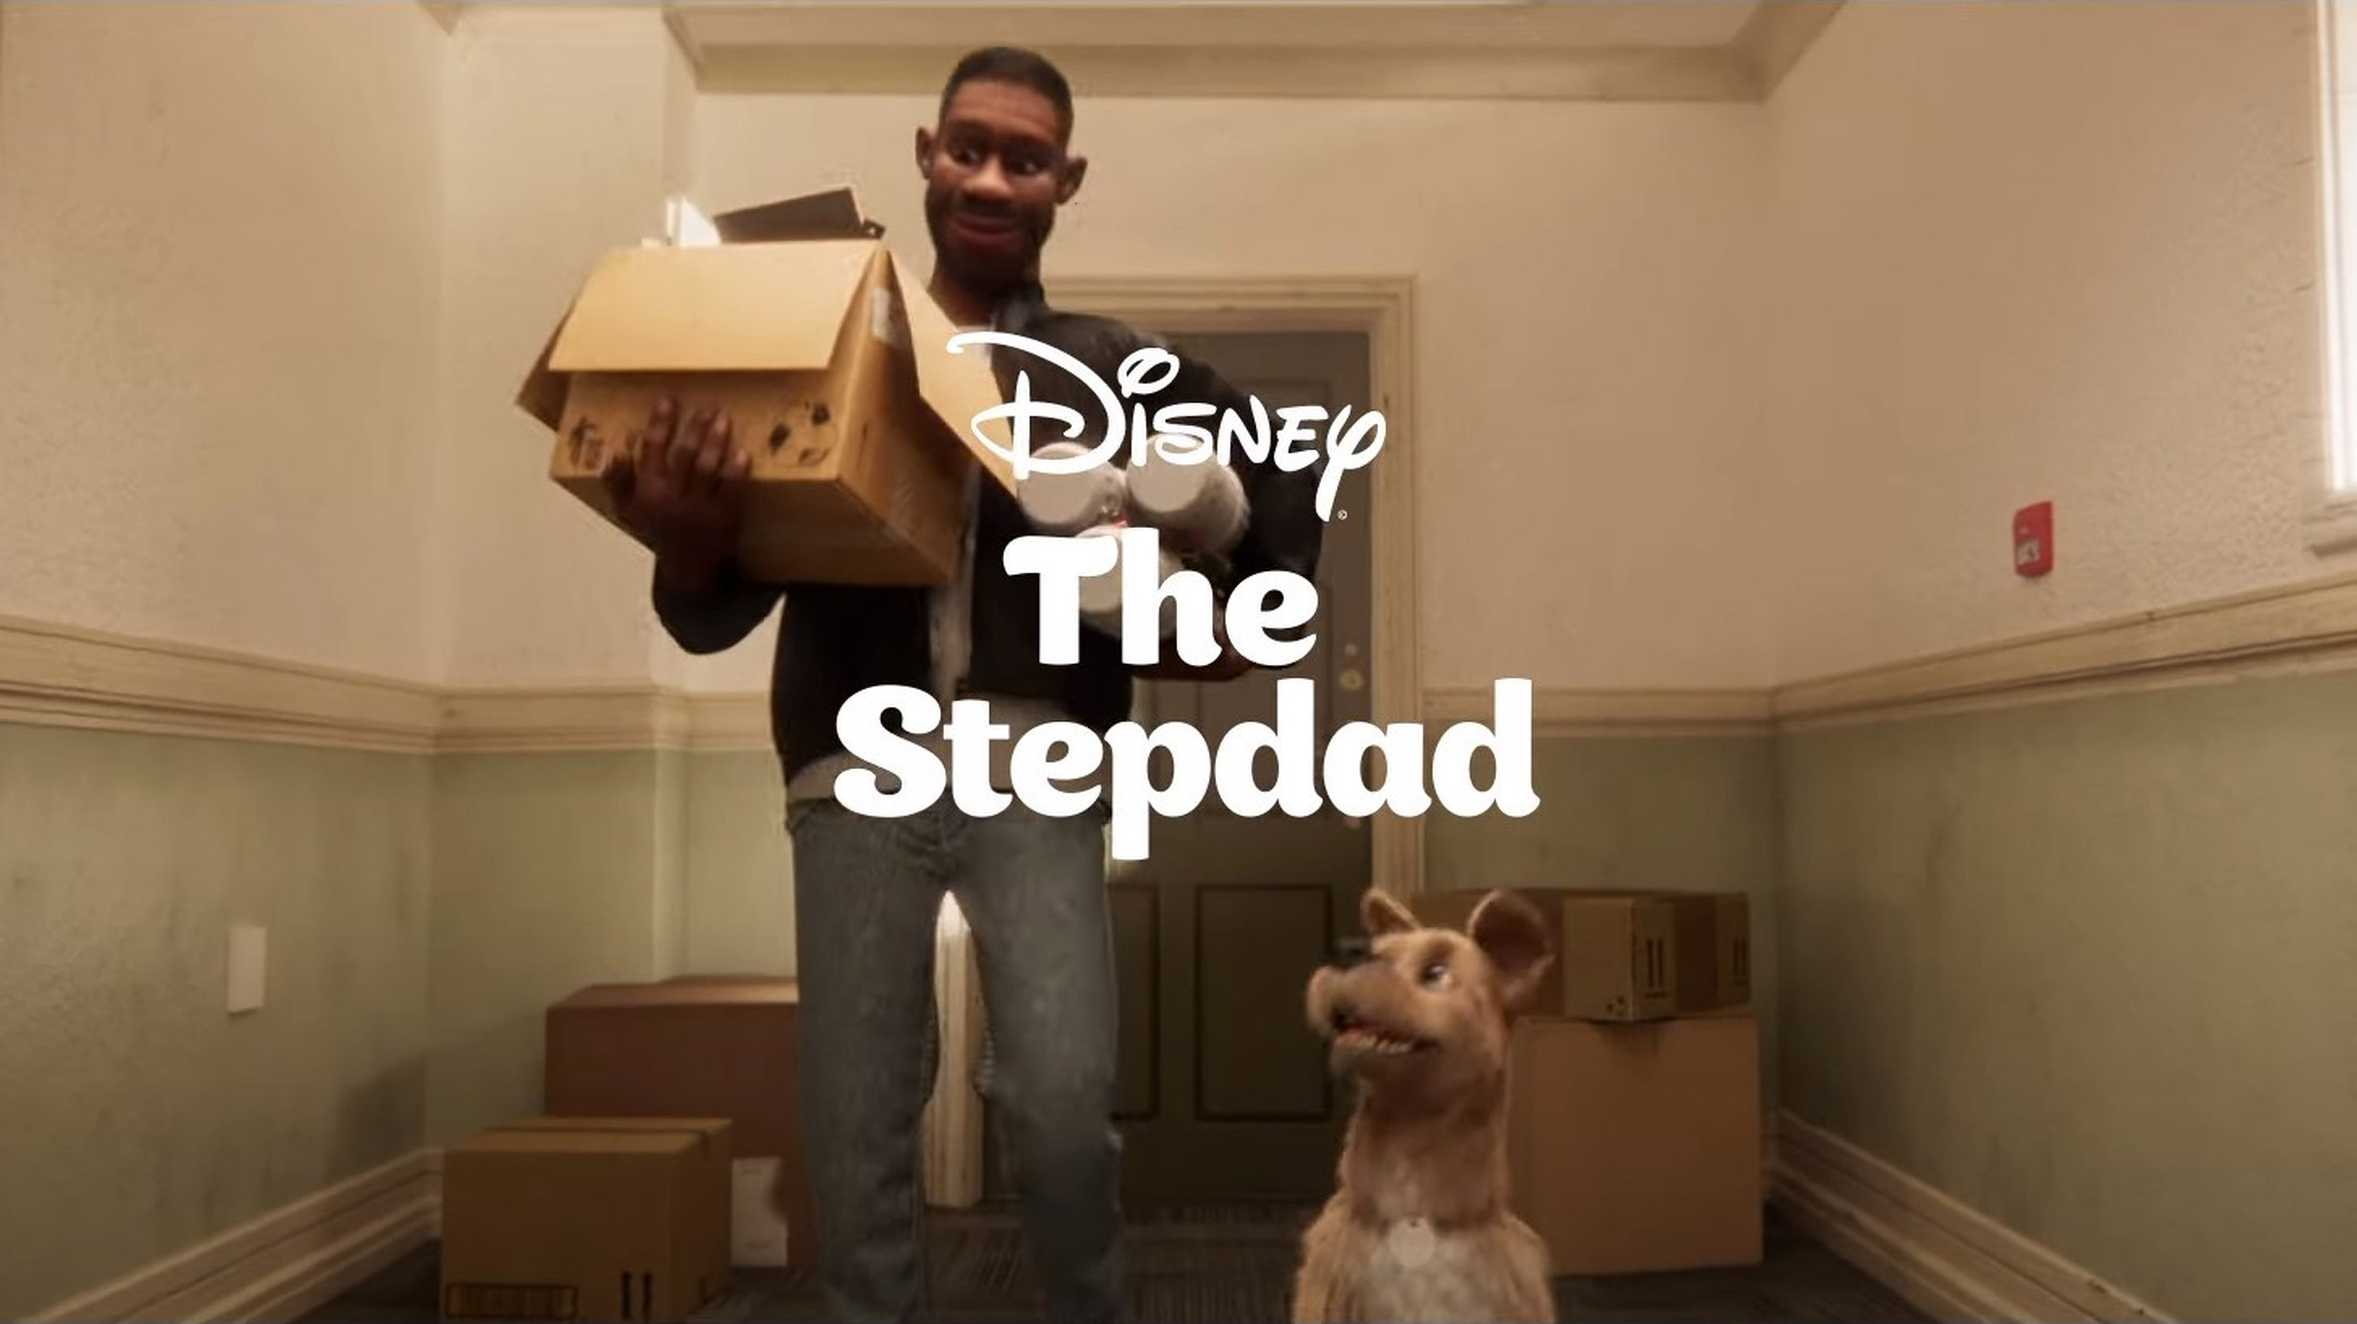 The title frame of the new Disney advert, showing the stepdad moving in with his family.